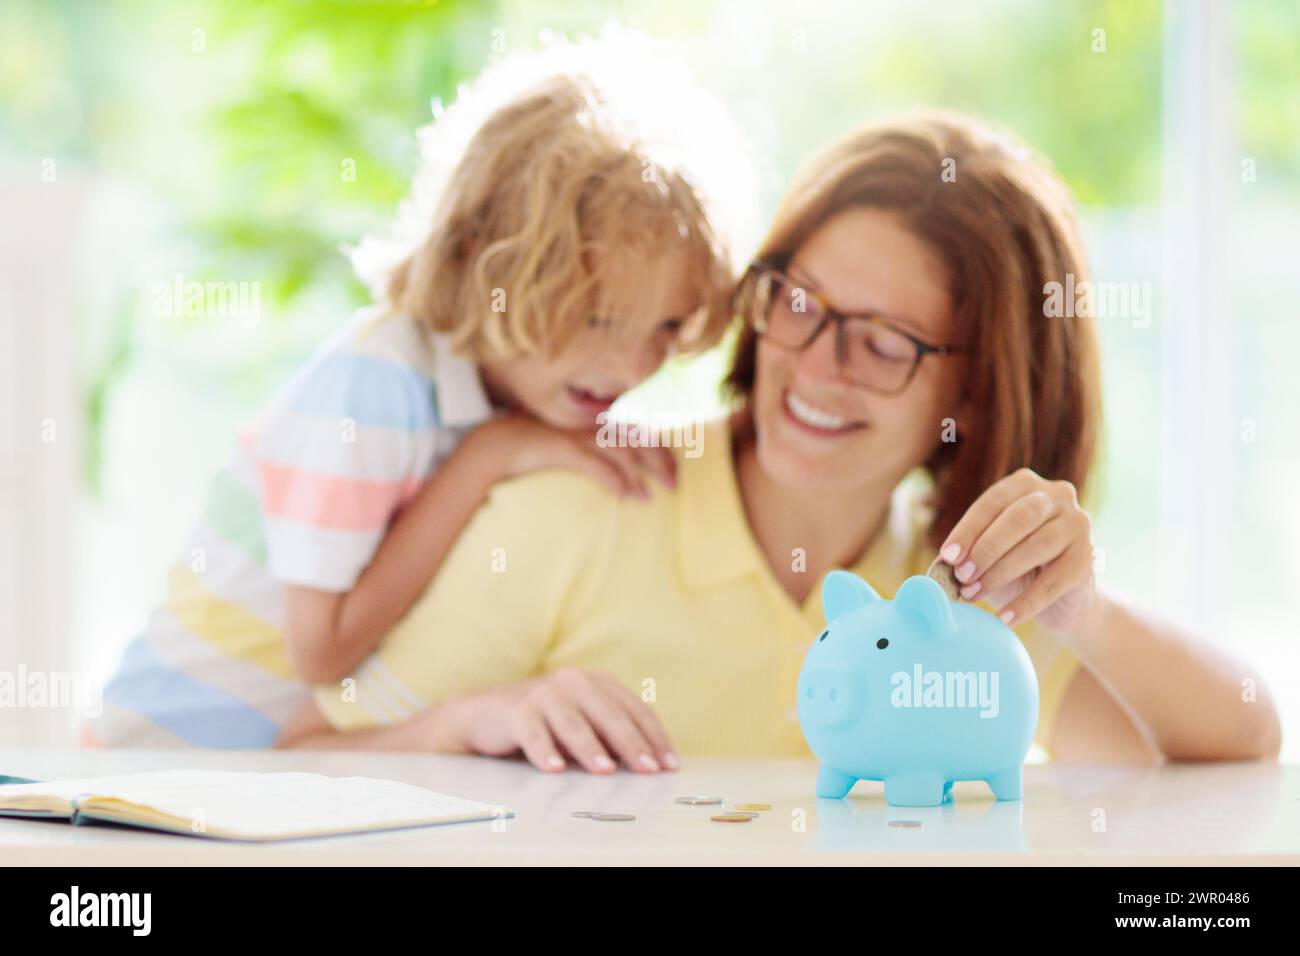 Child putting coin in piggy bank. Kids learn about money. Savings and investment. Little boy saving cash. Wealth growth for young family with children Stock Photo